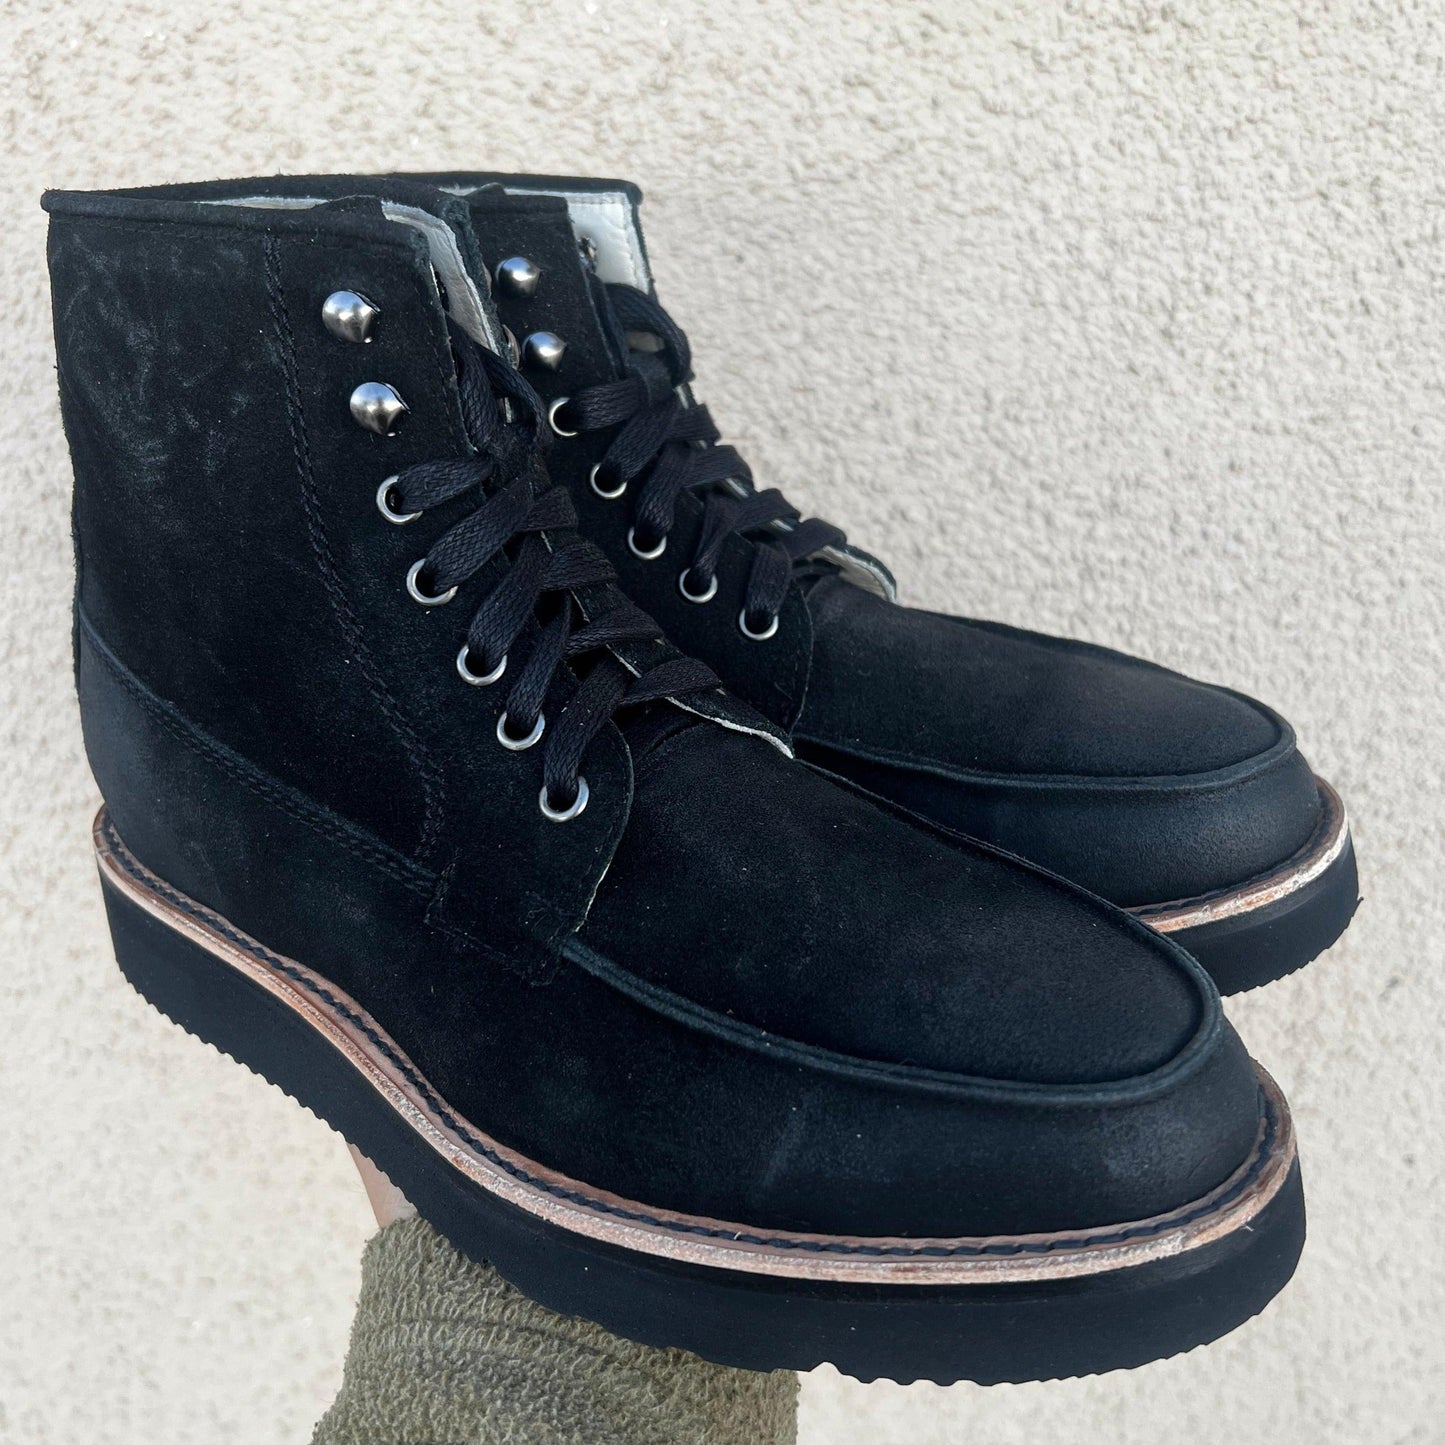 Waxed Suede Midnight Nomad Size 7.5 Item #0778 - DIEVIER